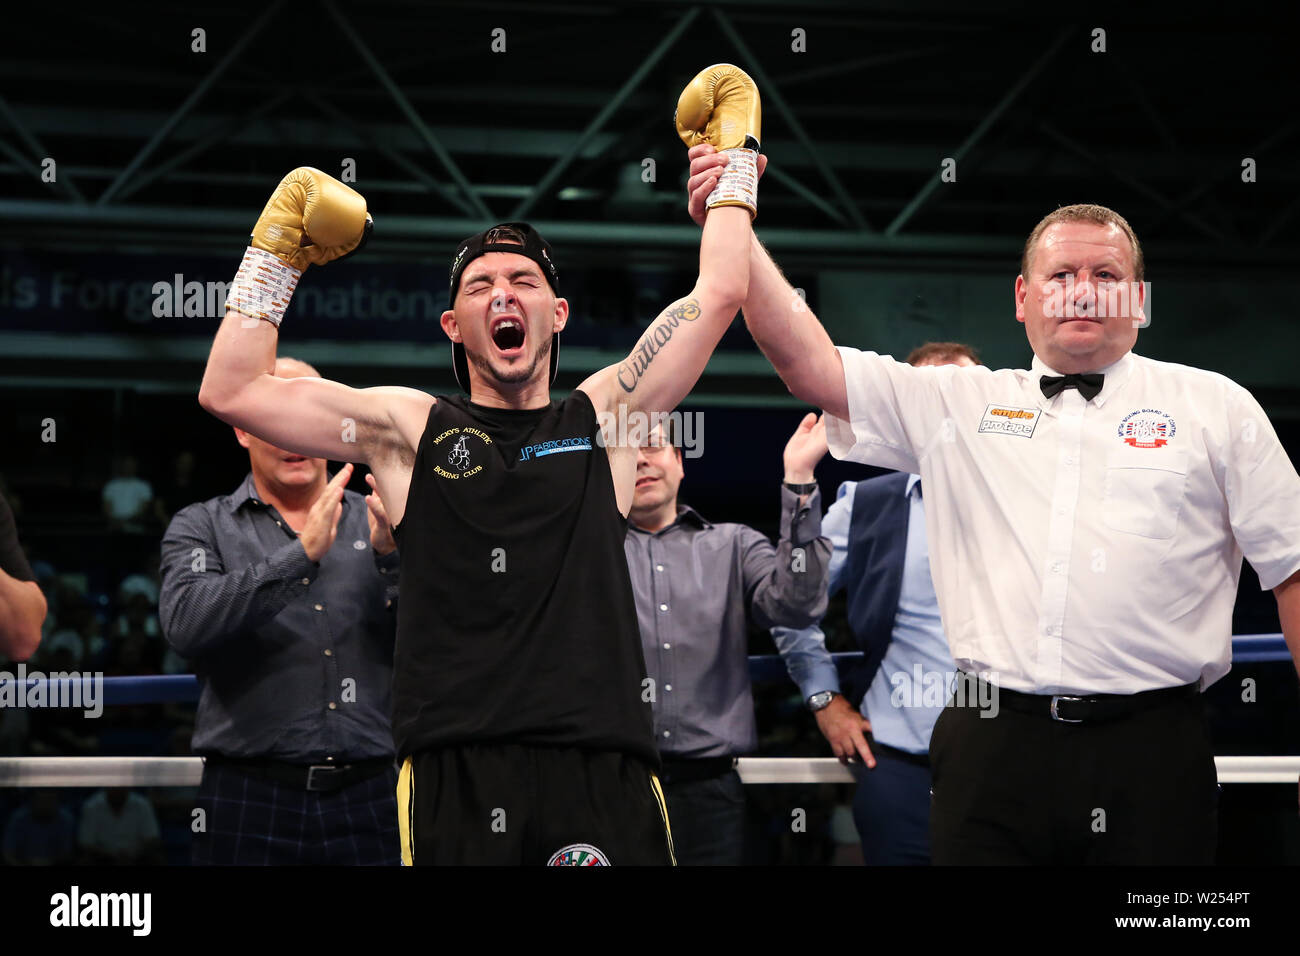 Josh Wale celebrates knocking out Ekow Wilson during the Dennis Hobson Promotions at Ponds Forge, Sheffield. Picture date: 5th July 2019. Picture cred Stock Photo